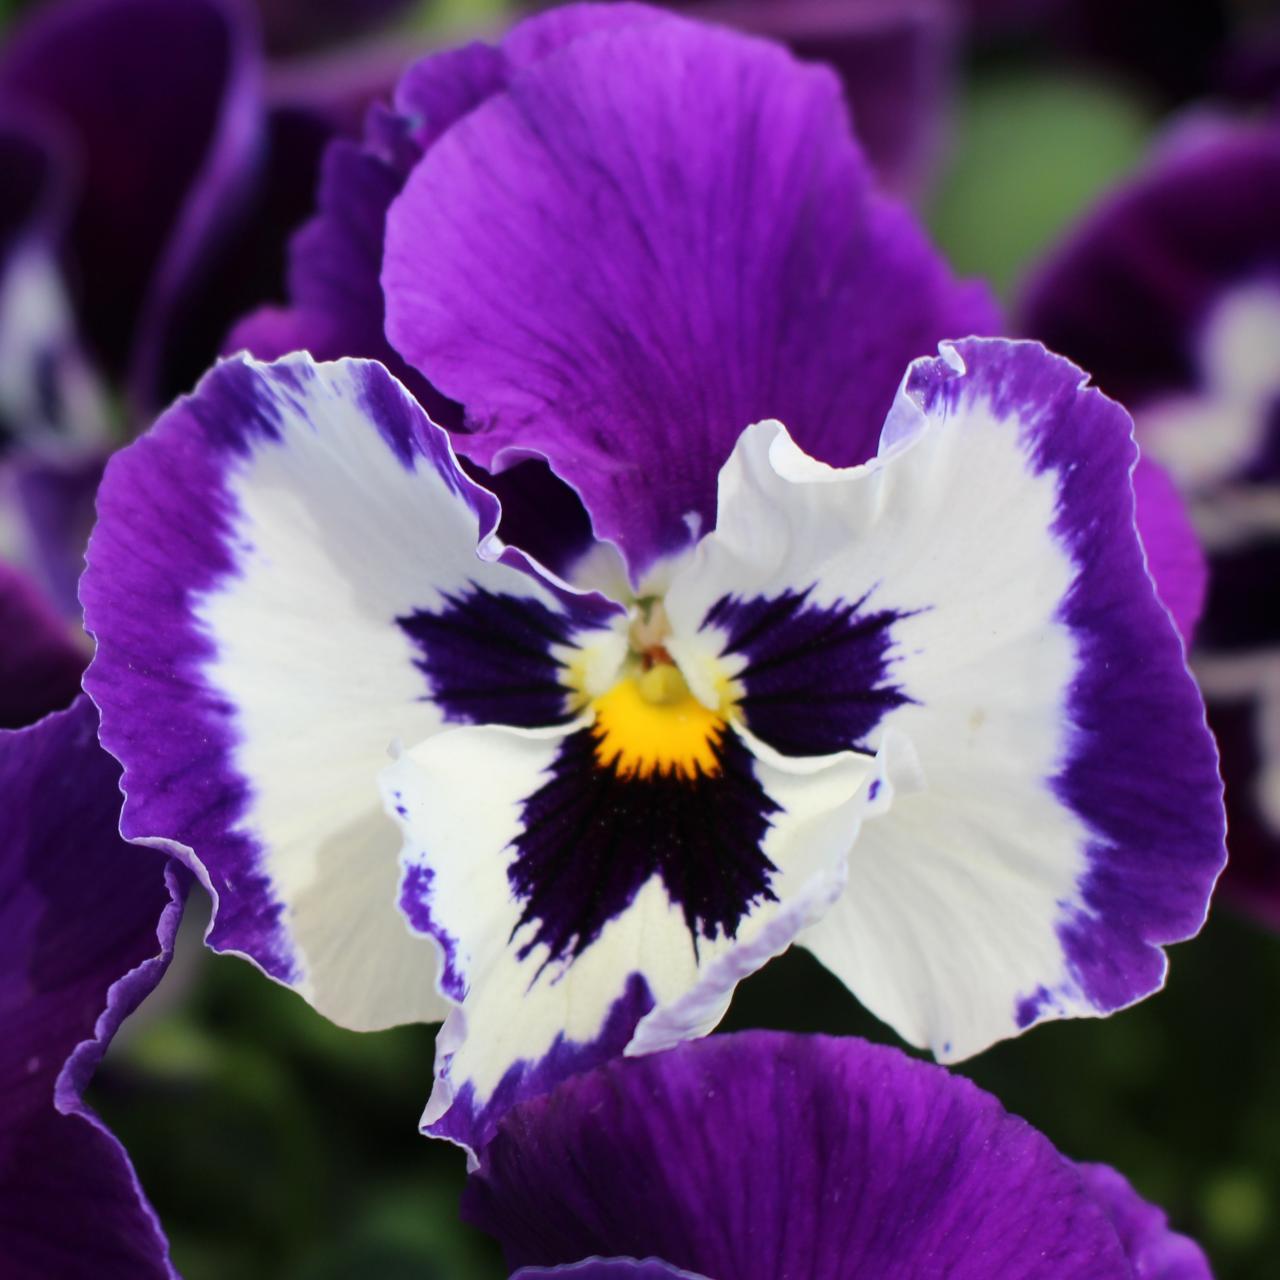 pansies: how to grow and care for pansy flowers | hgtv